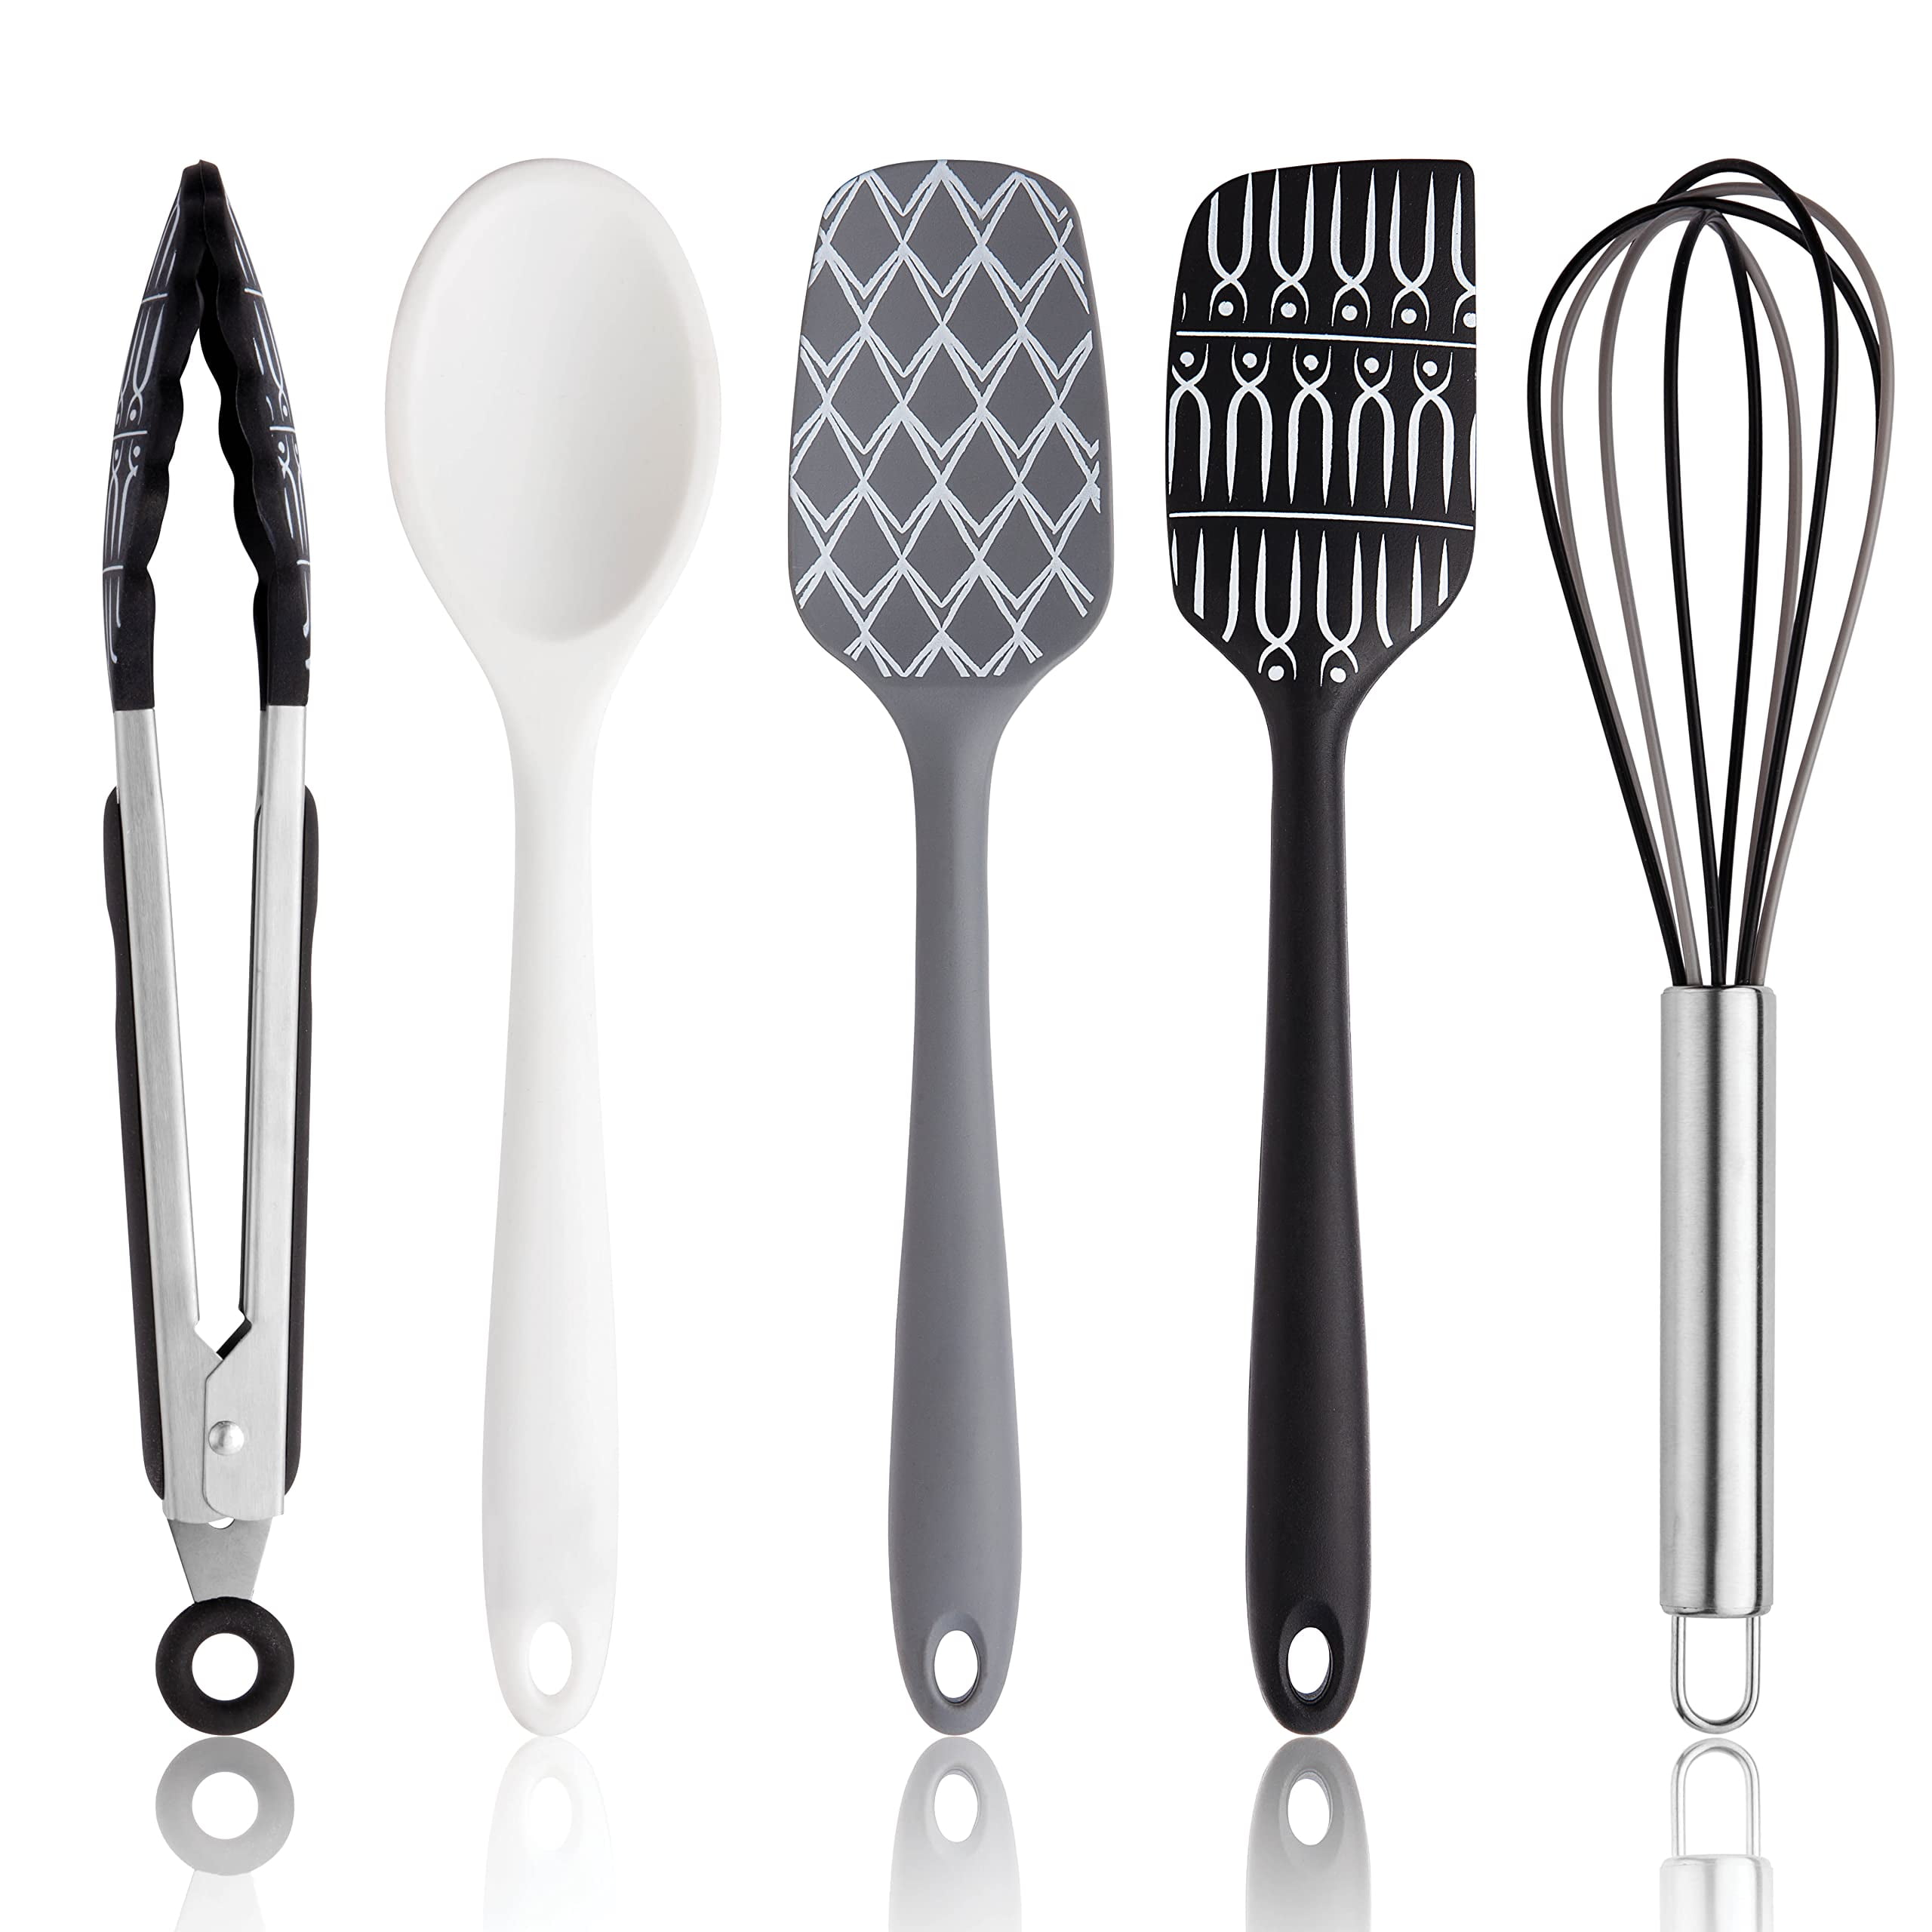 Country Kitchen country kitchen silicone cooking utensils, 8 pc kitchen  utensil set, easy to clean wooden kitchen utensils, cooking utensils